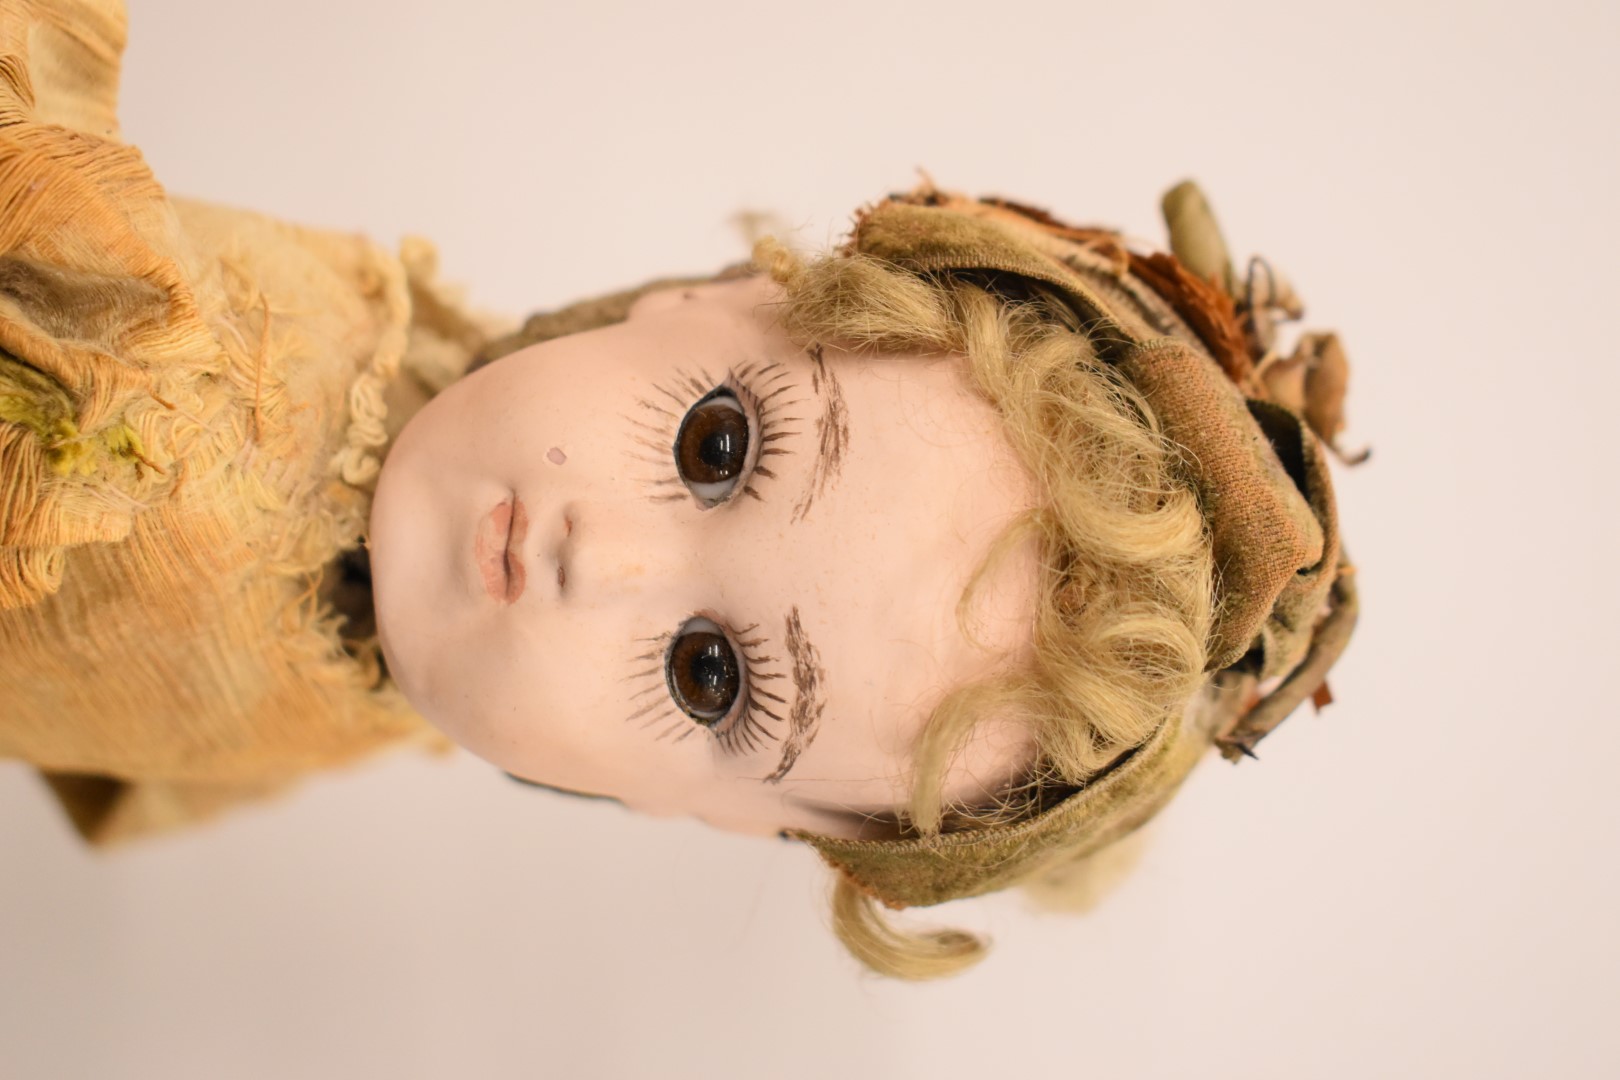 19th century likely French Renou automaton model of a doll, with bisque or similar face and lower - Image 9 of 12